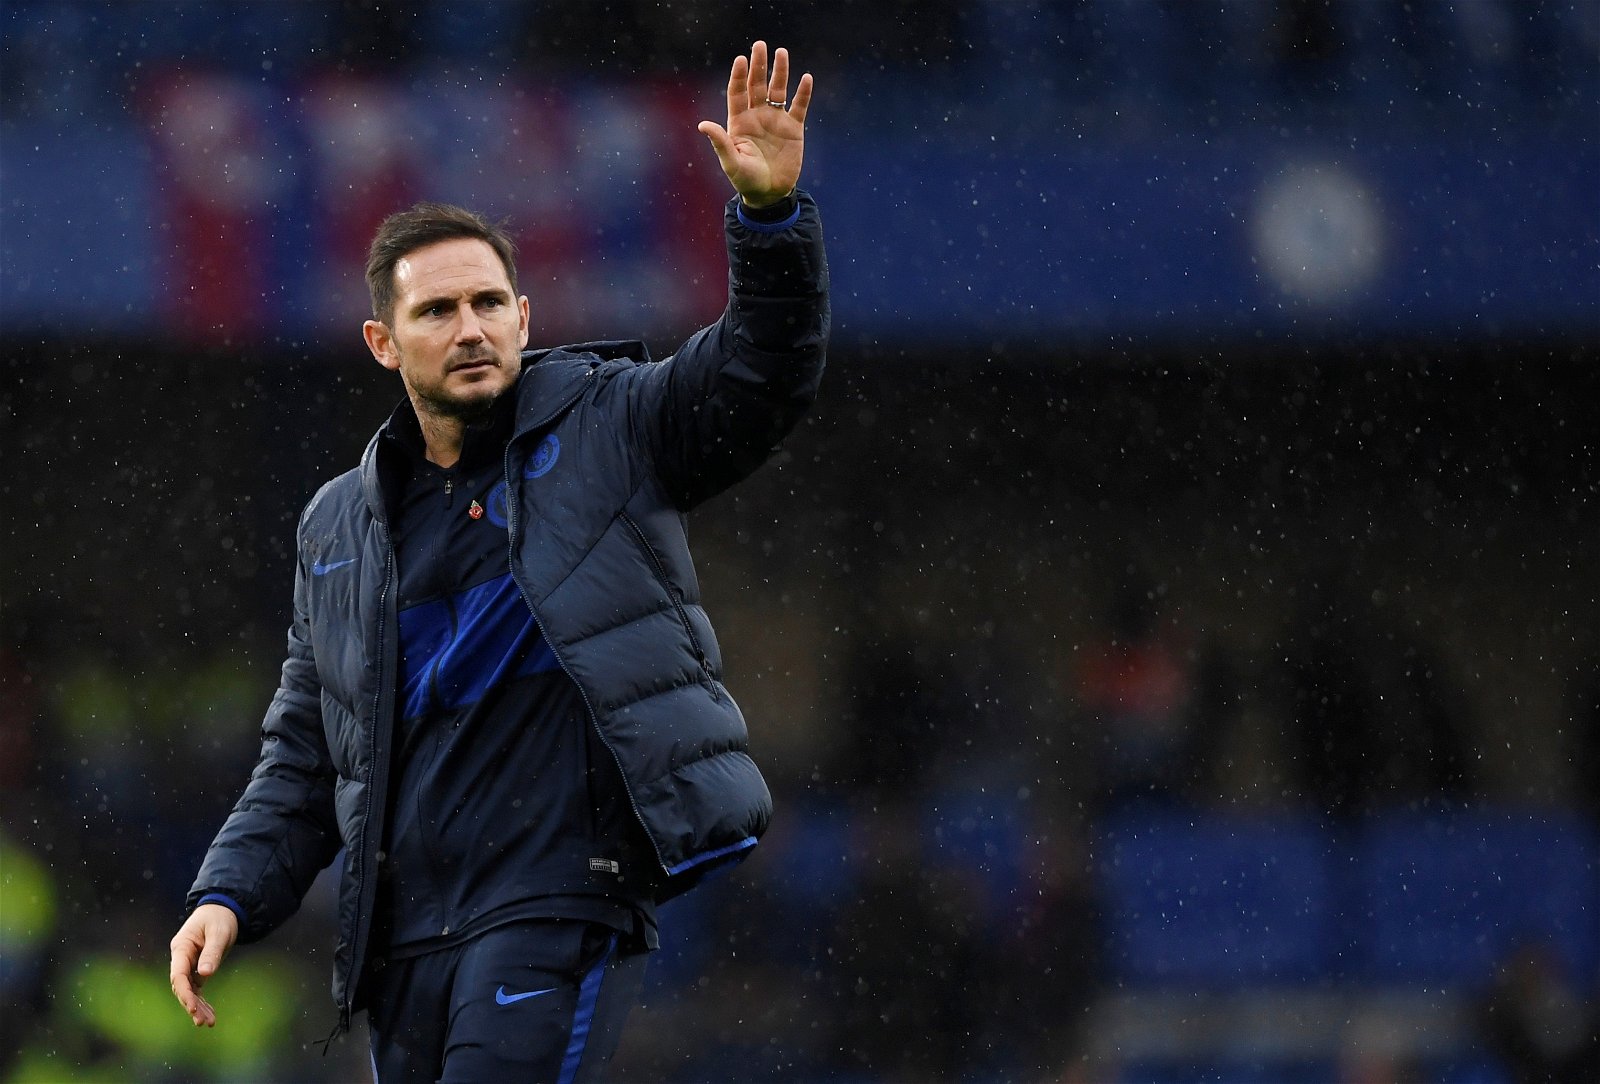 Chelsea's Frank Lampard awarded Premier League Manager of the Month